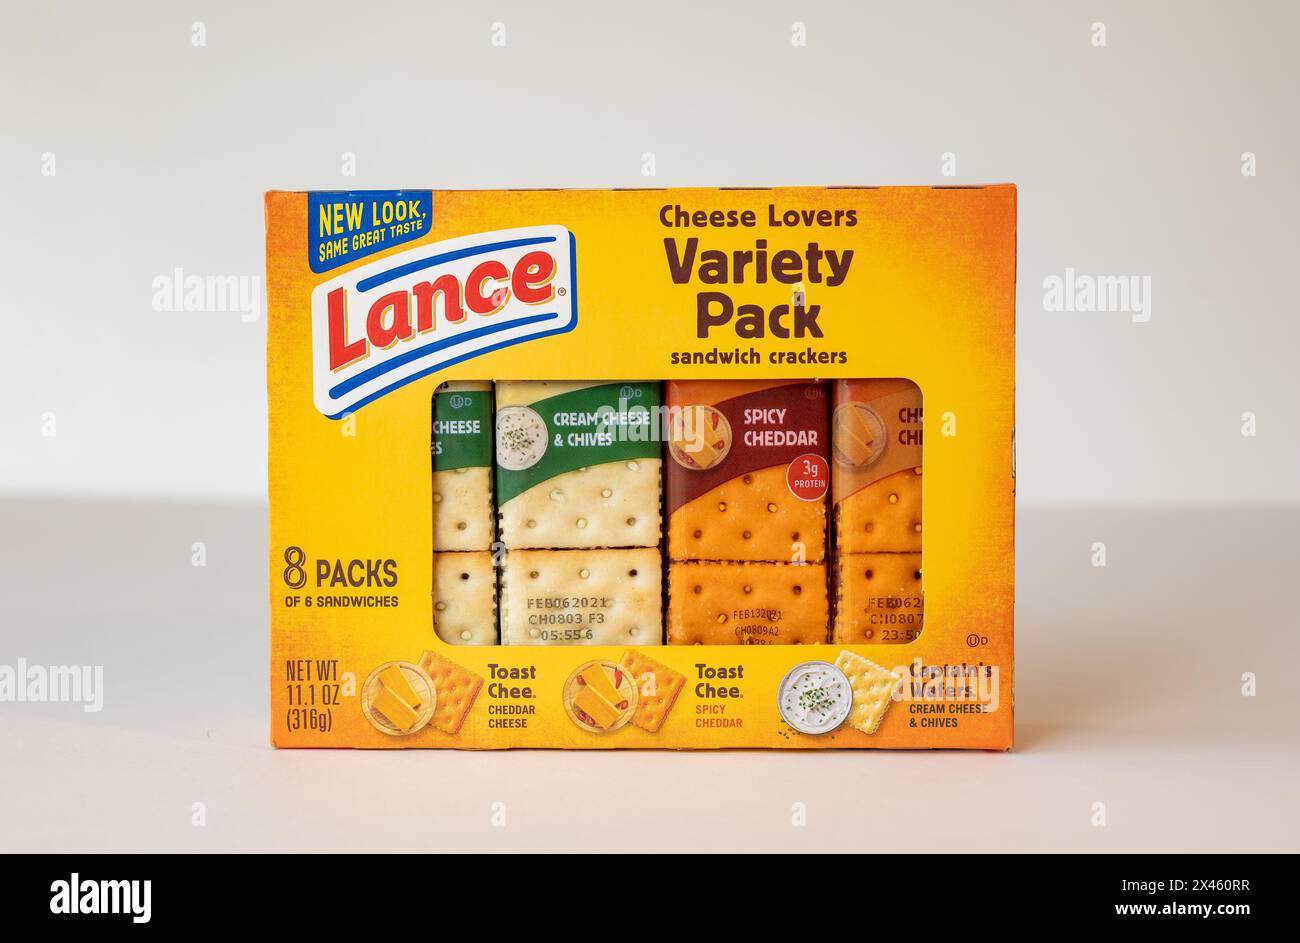 BEMIDJI, MN - 17 nov 2020 : paquet de lance Cheese Lovers Variety Pack sandwich crackers aliments snacks. Banque D'Images